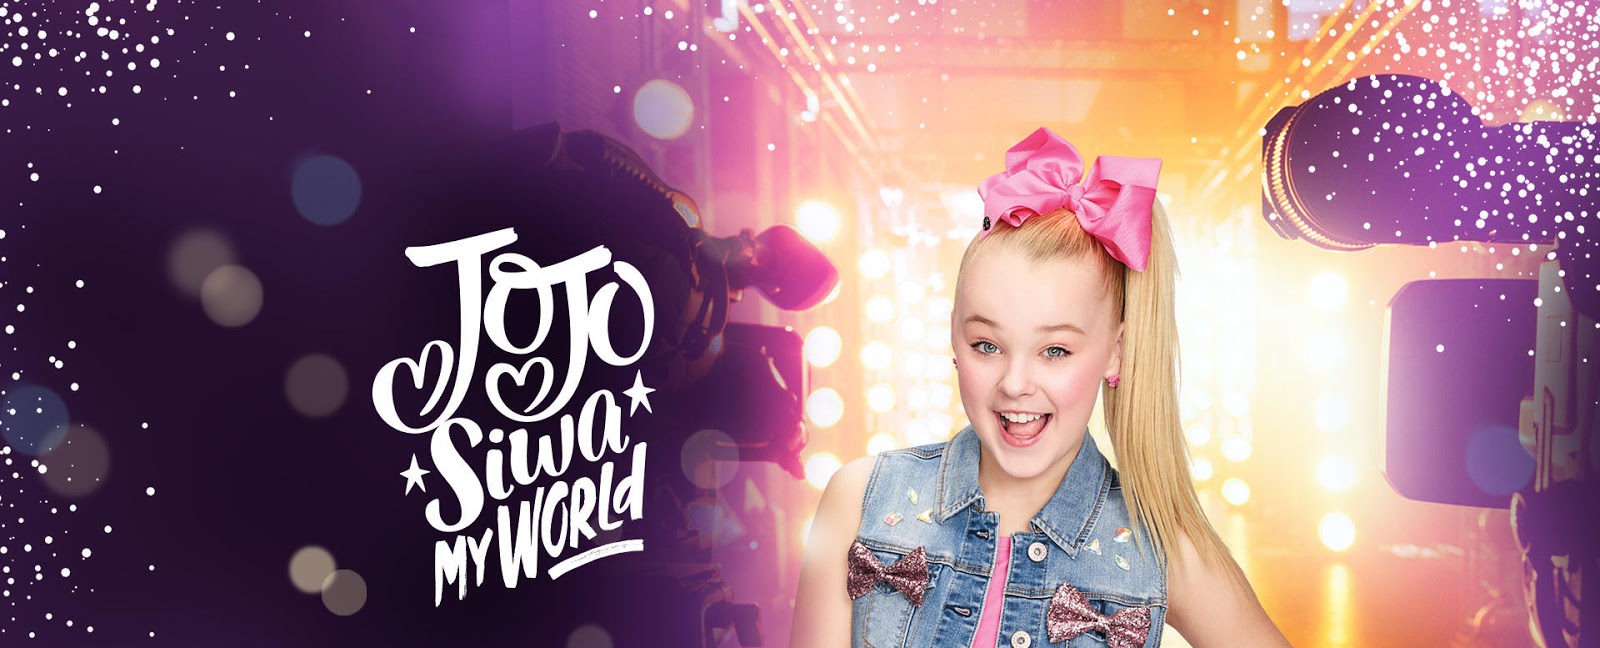 NickALive!: JoJo Siwa Adds 'The J Team' Song 'Dance Through The Day' to  Tour Set After Nickelodeon Previously Said No